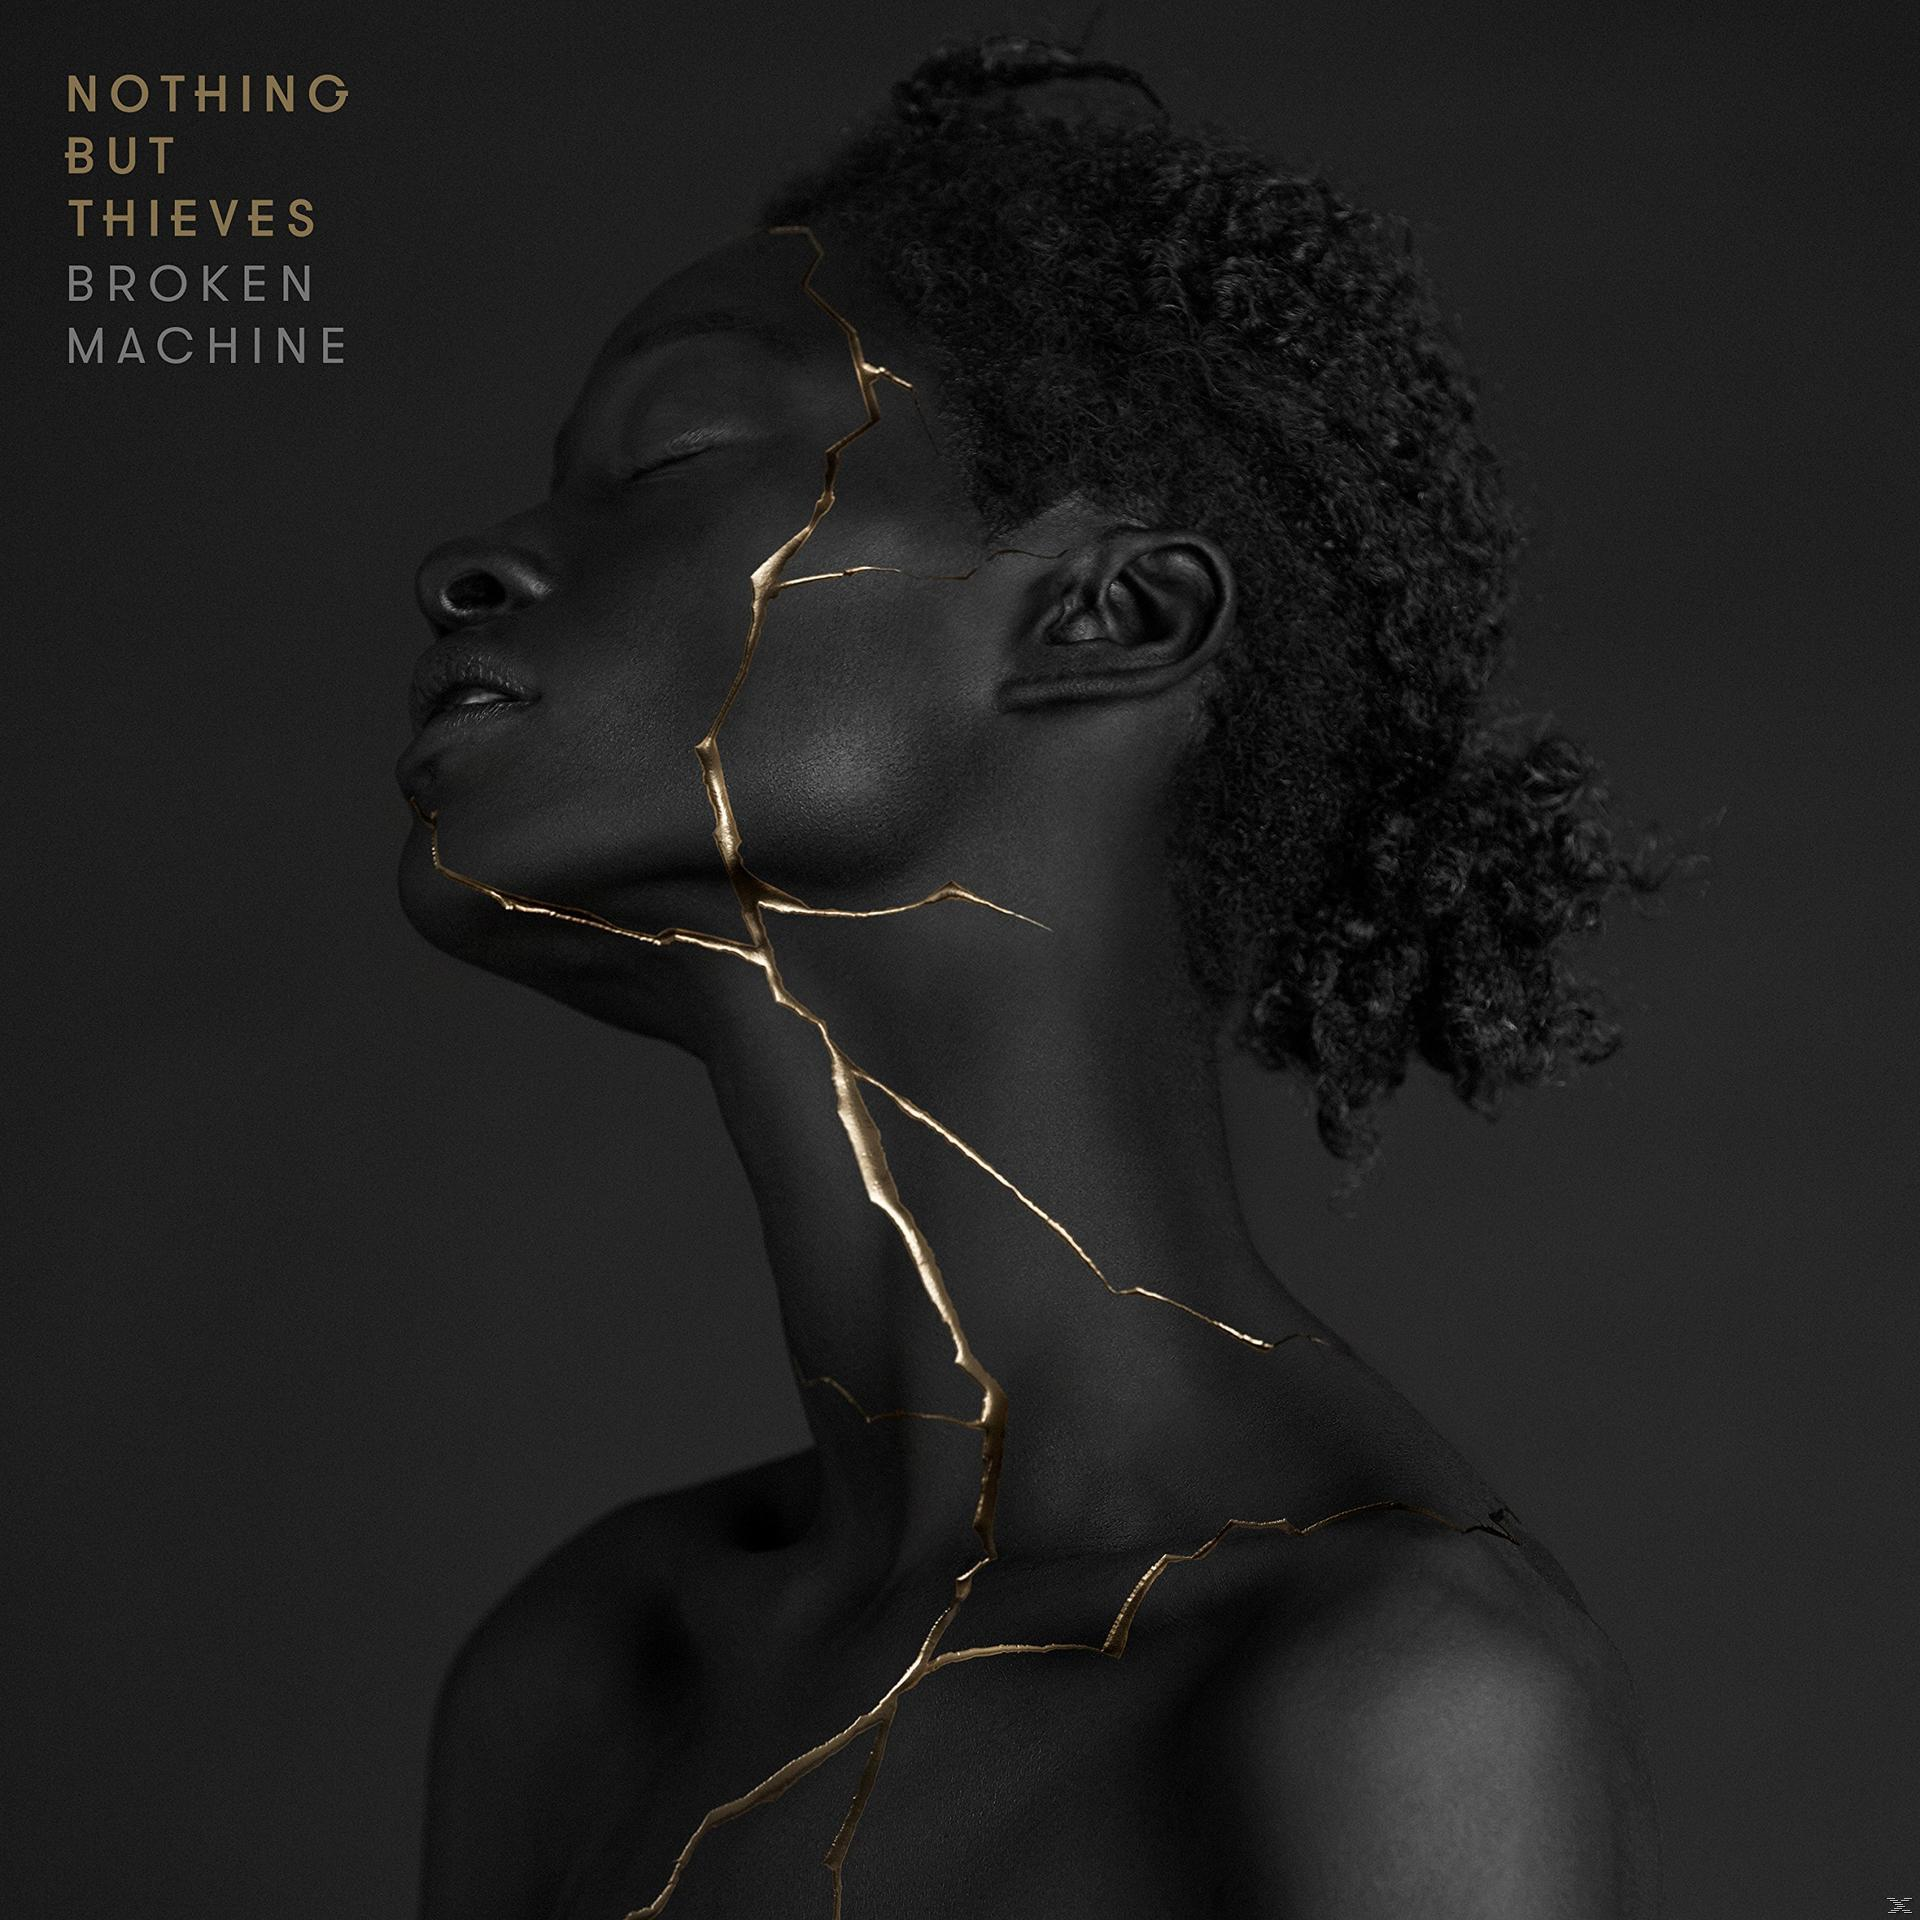 Nothing But Thieves - Broken - (CD) (Deluxe) Machine